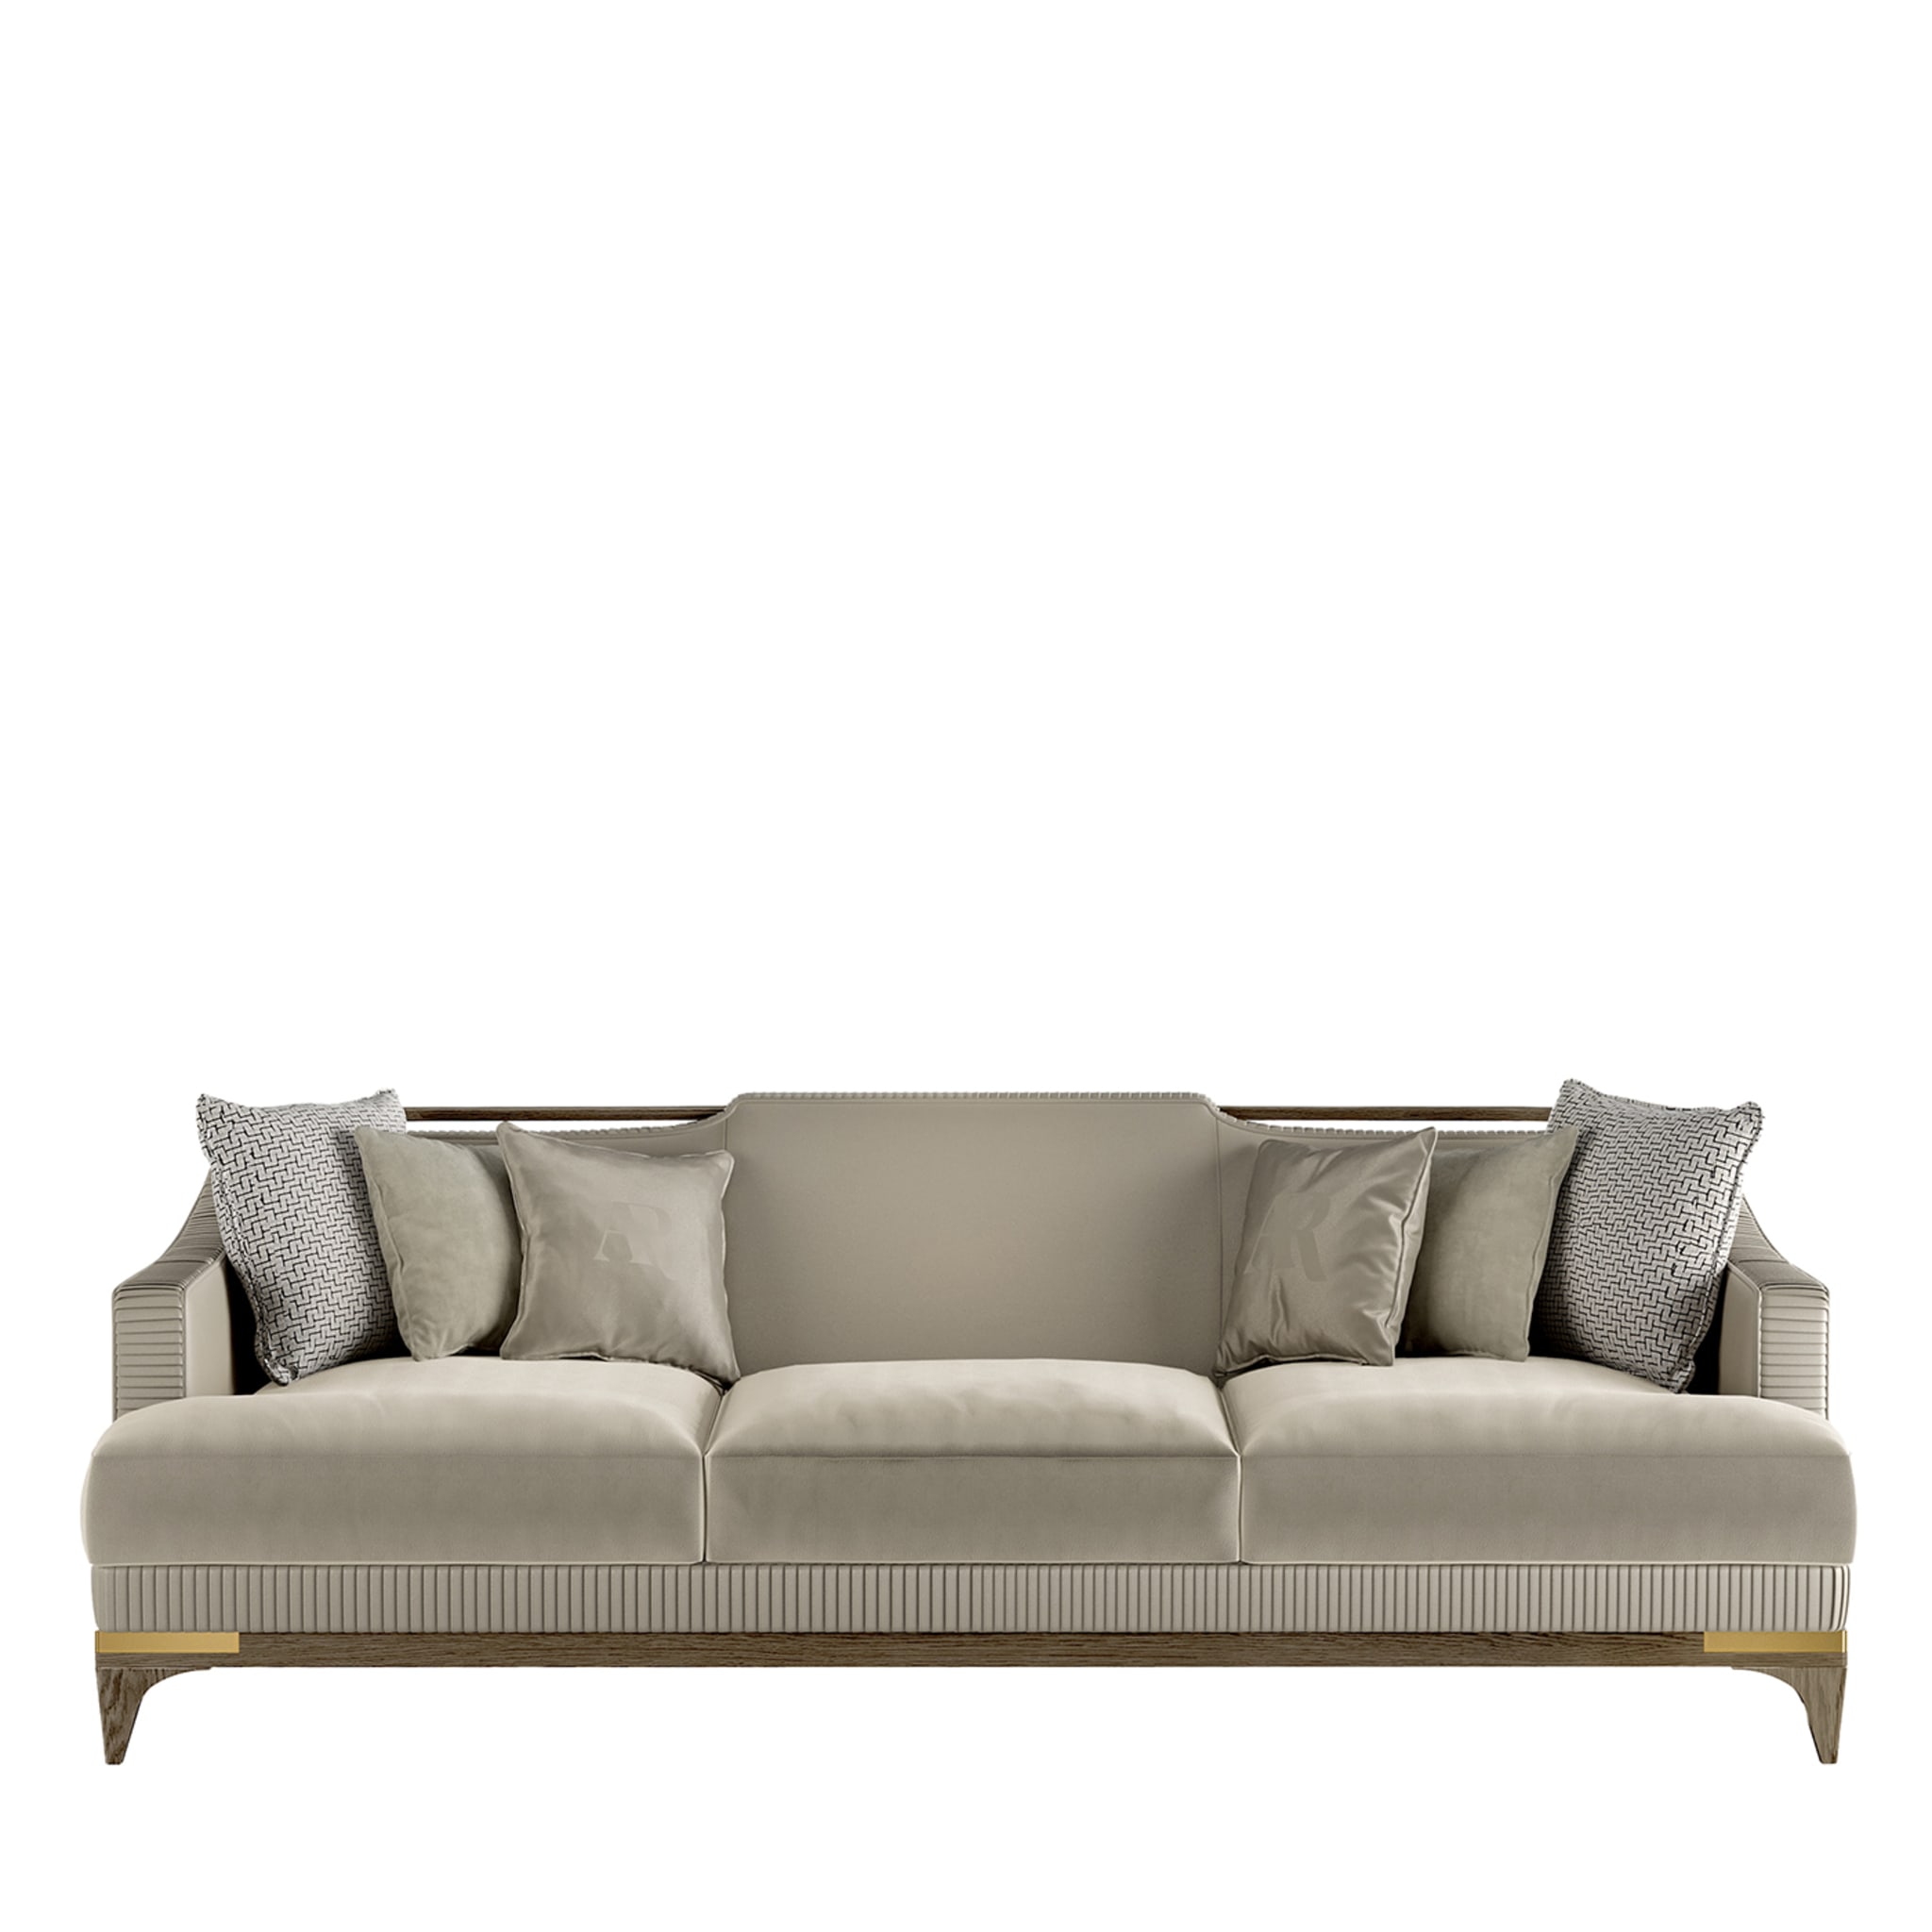 Beige Leather and Fabric 3-Seat Sofa - Main view